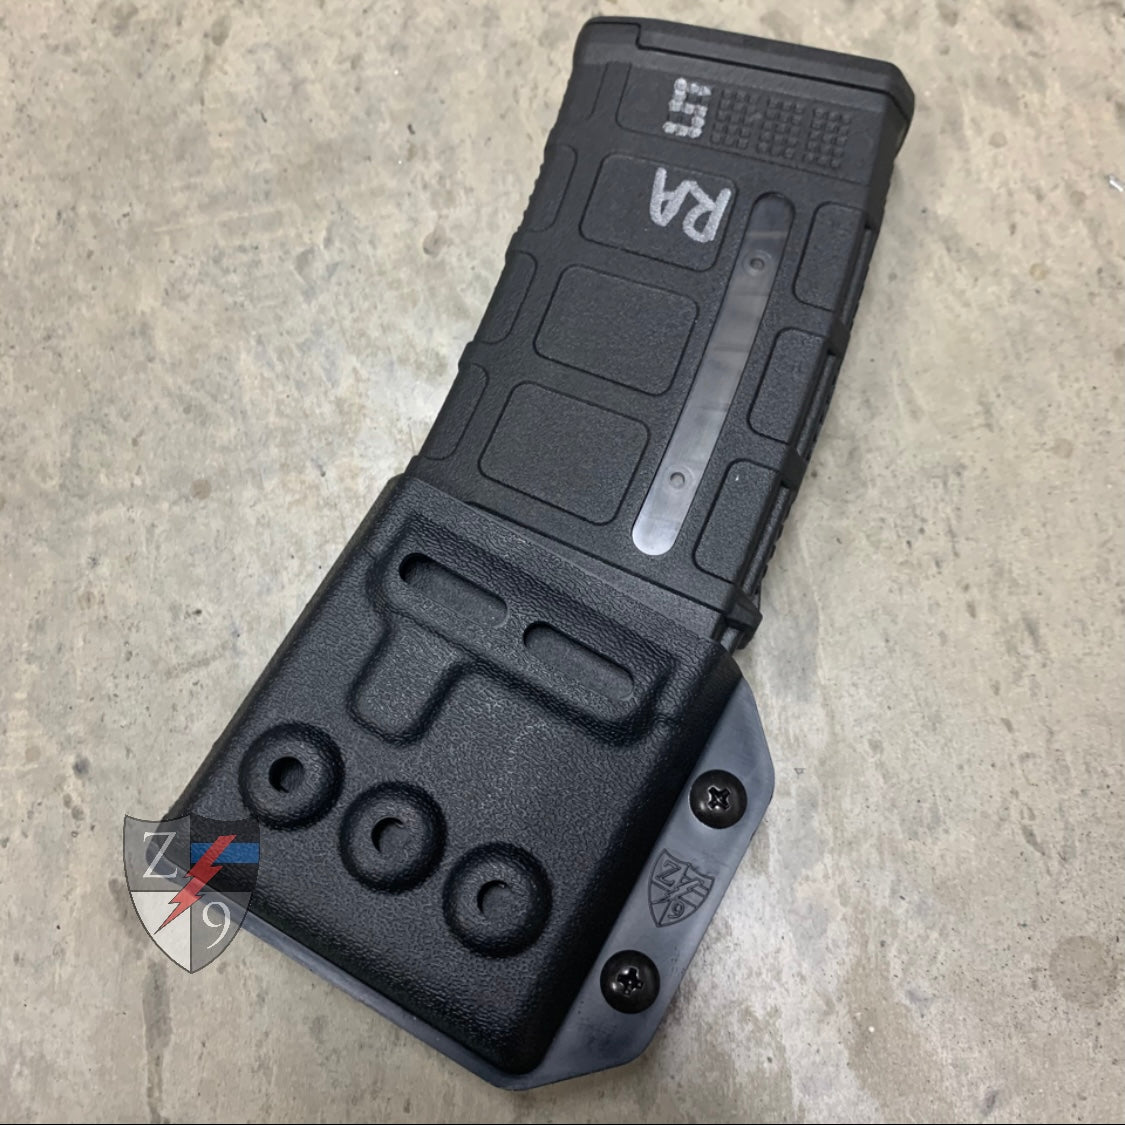 Additional Hardware and Attachments – Zero9 Holsters